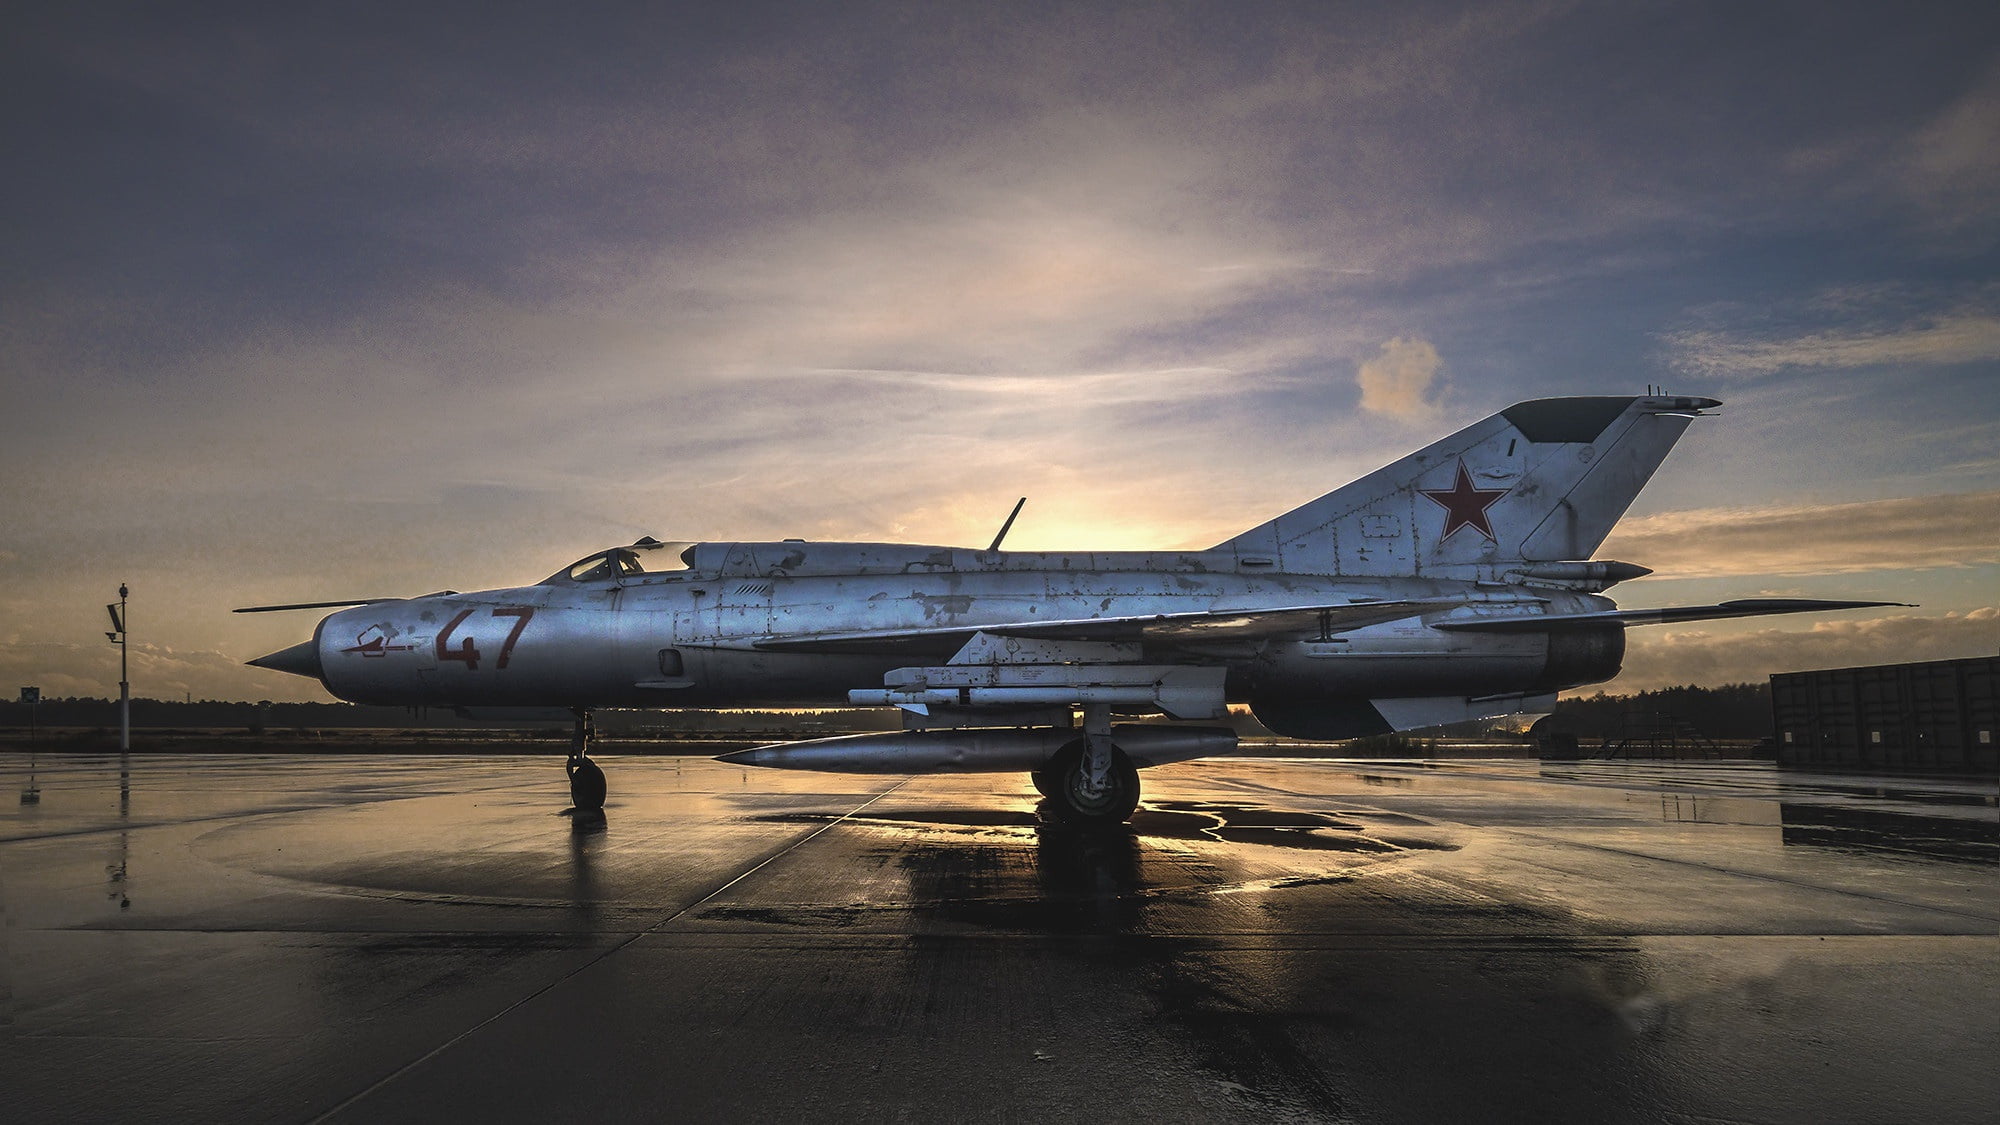 weapons, the plane, MiG 21